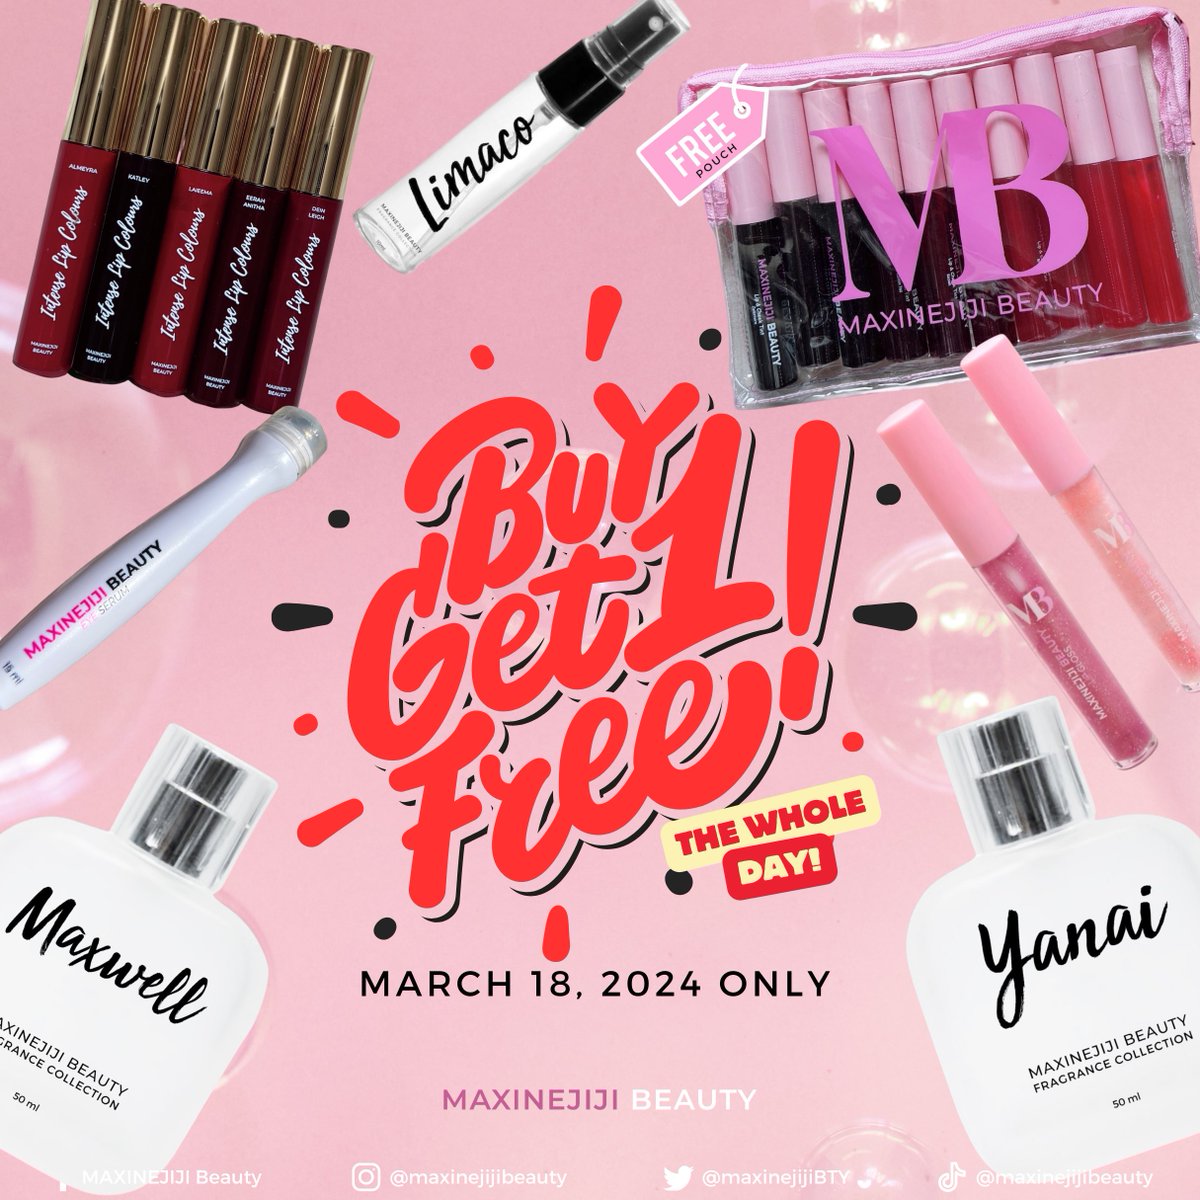 It's @maxinejiji 's  birthday! So it's Buy 1 and Get 1 for FREE today! Message us directly on Facebook to order! 🌸

#BeautyWithoutLimits
#MAXINEJIJIBeauty